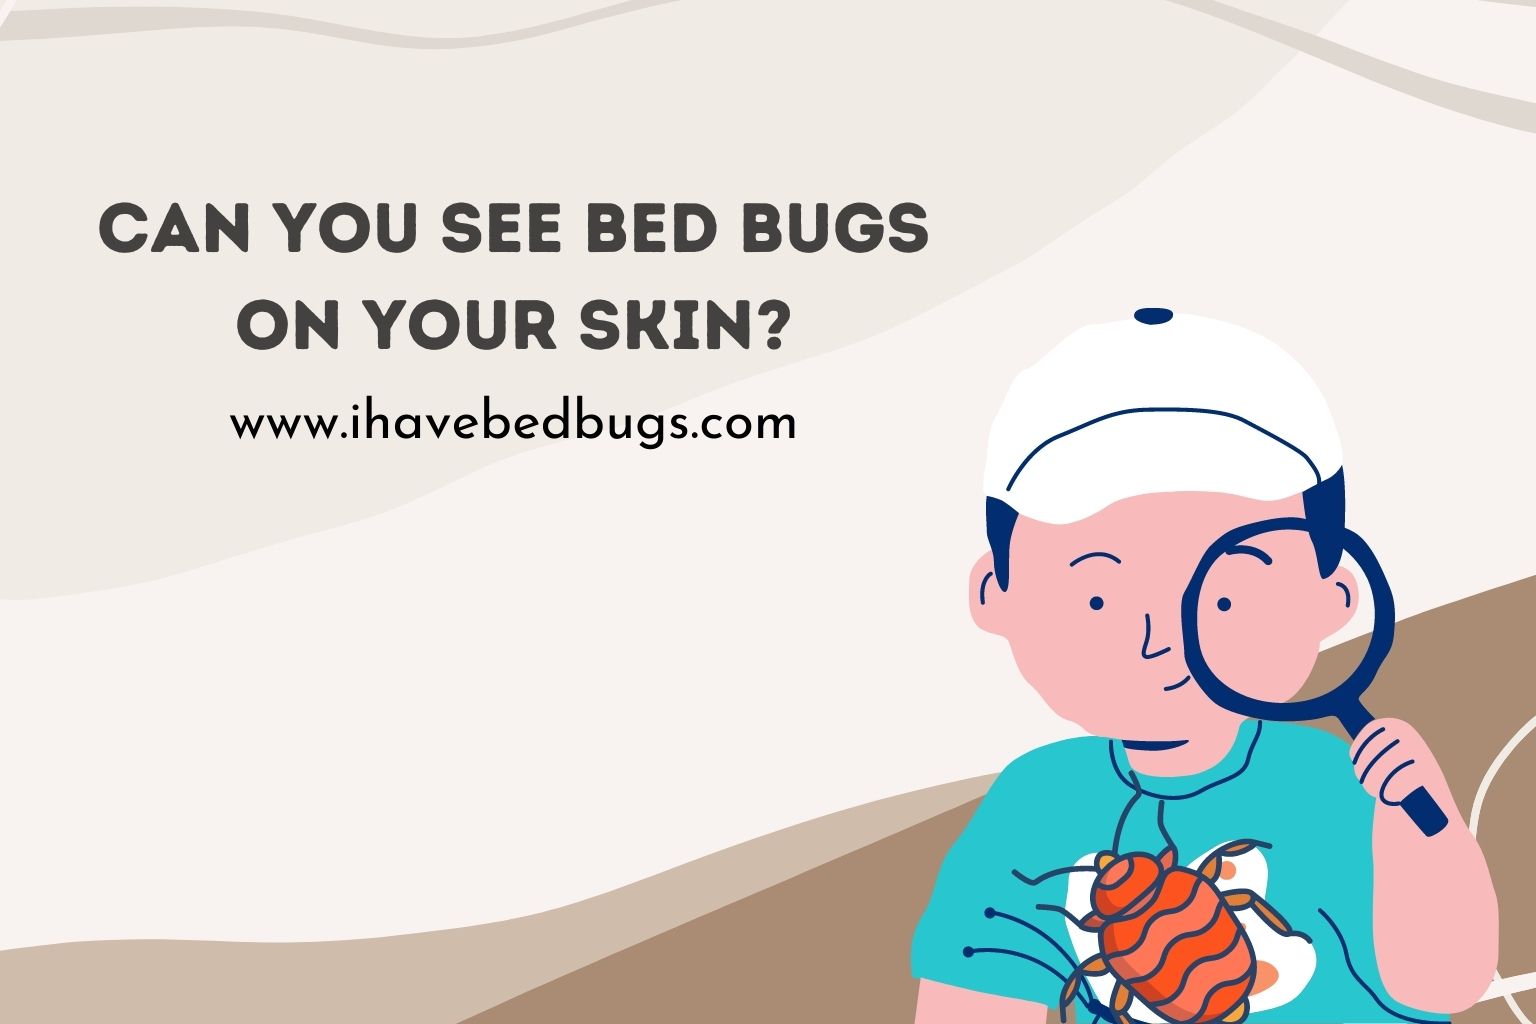 Can you see bed bugs on your skin